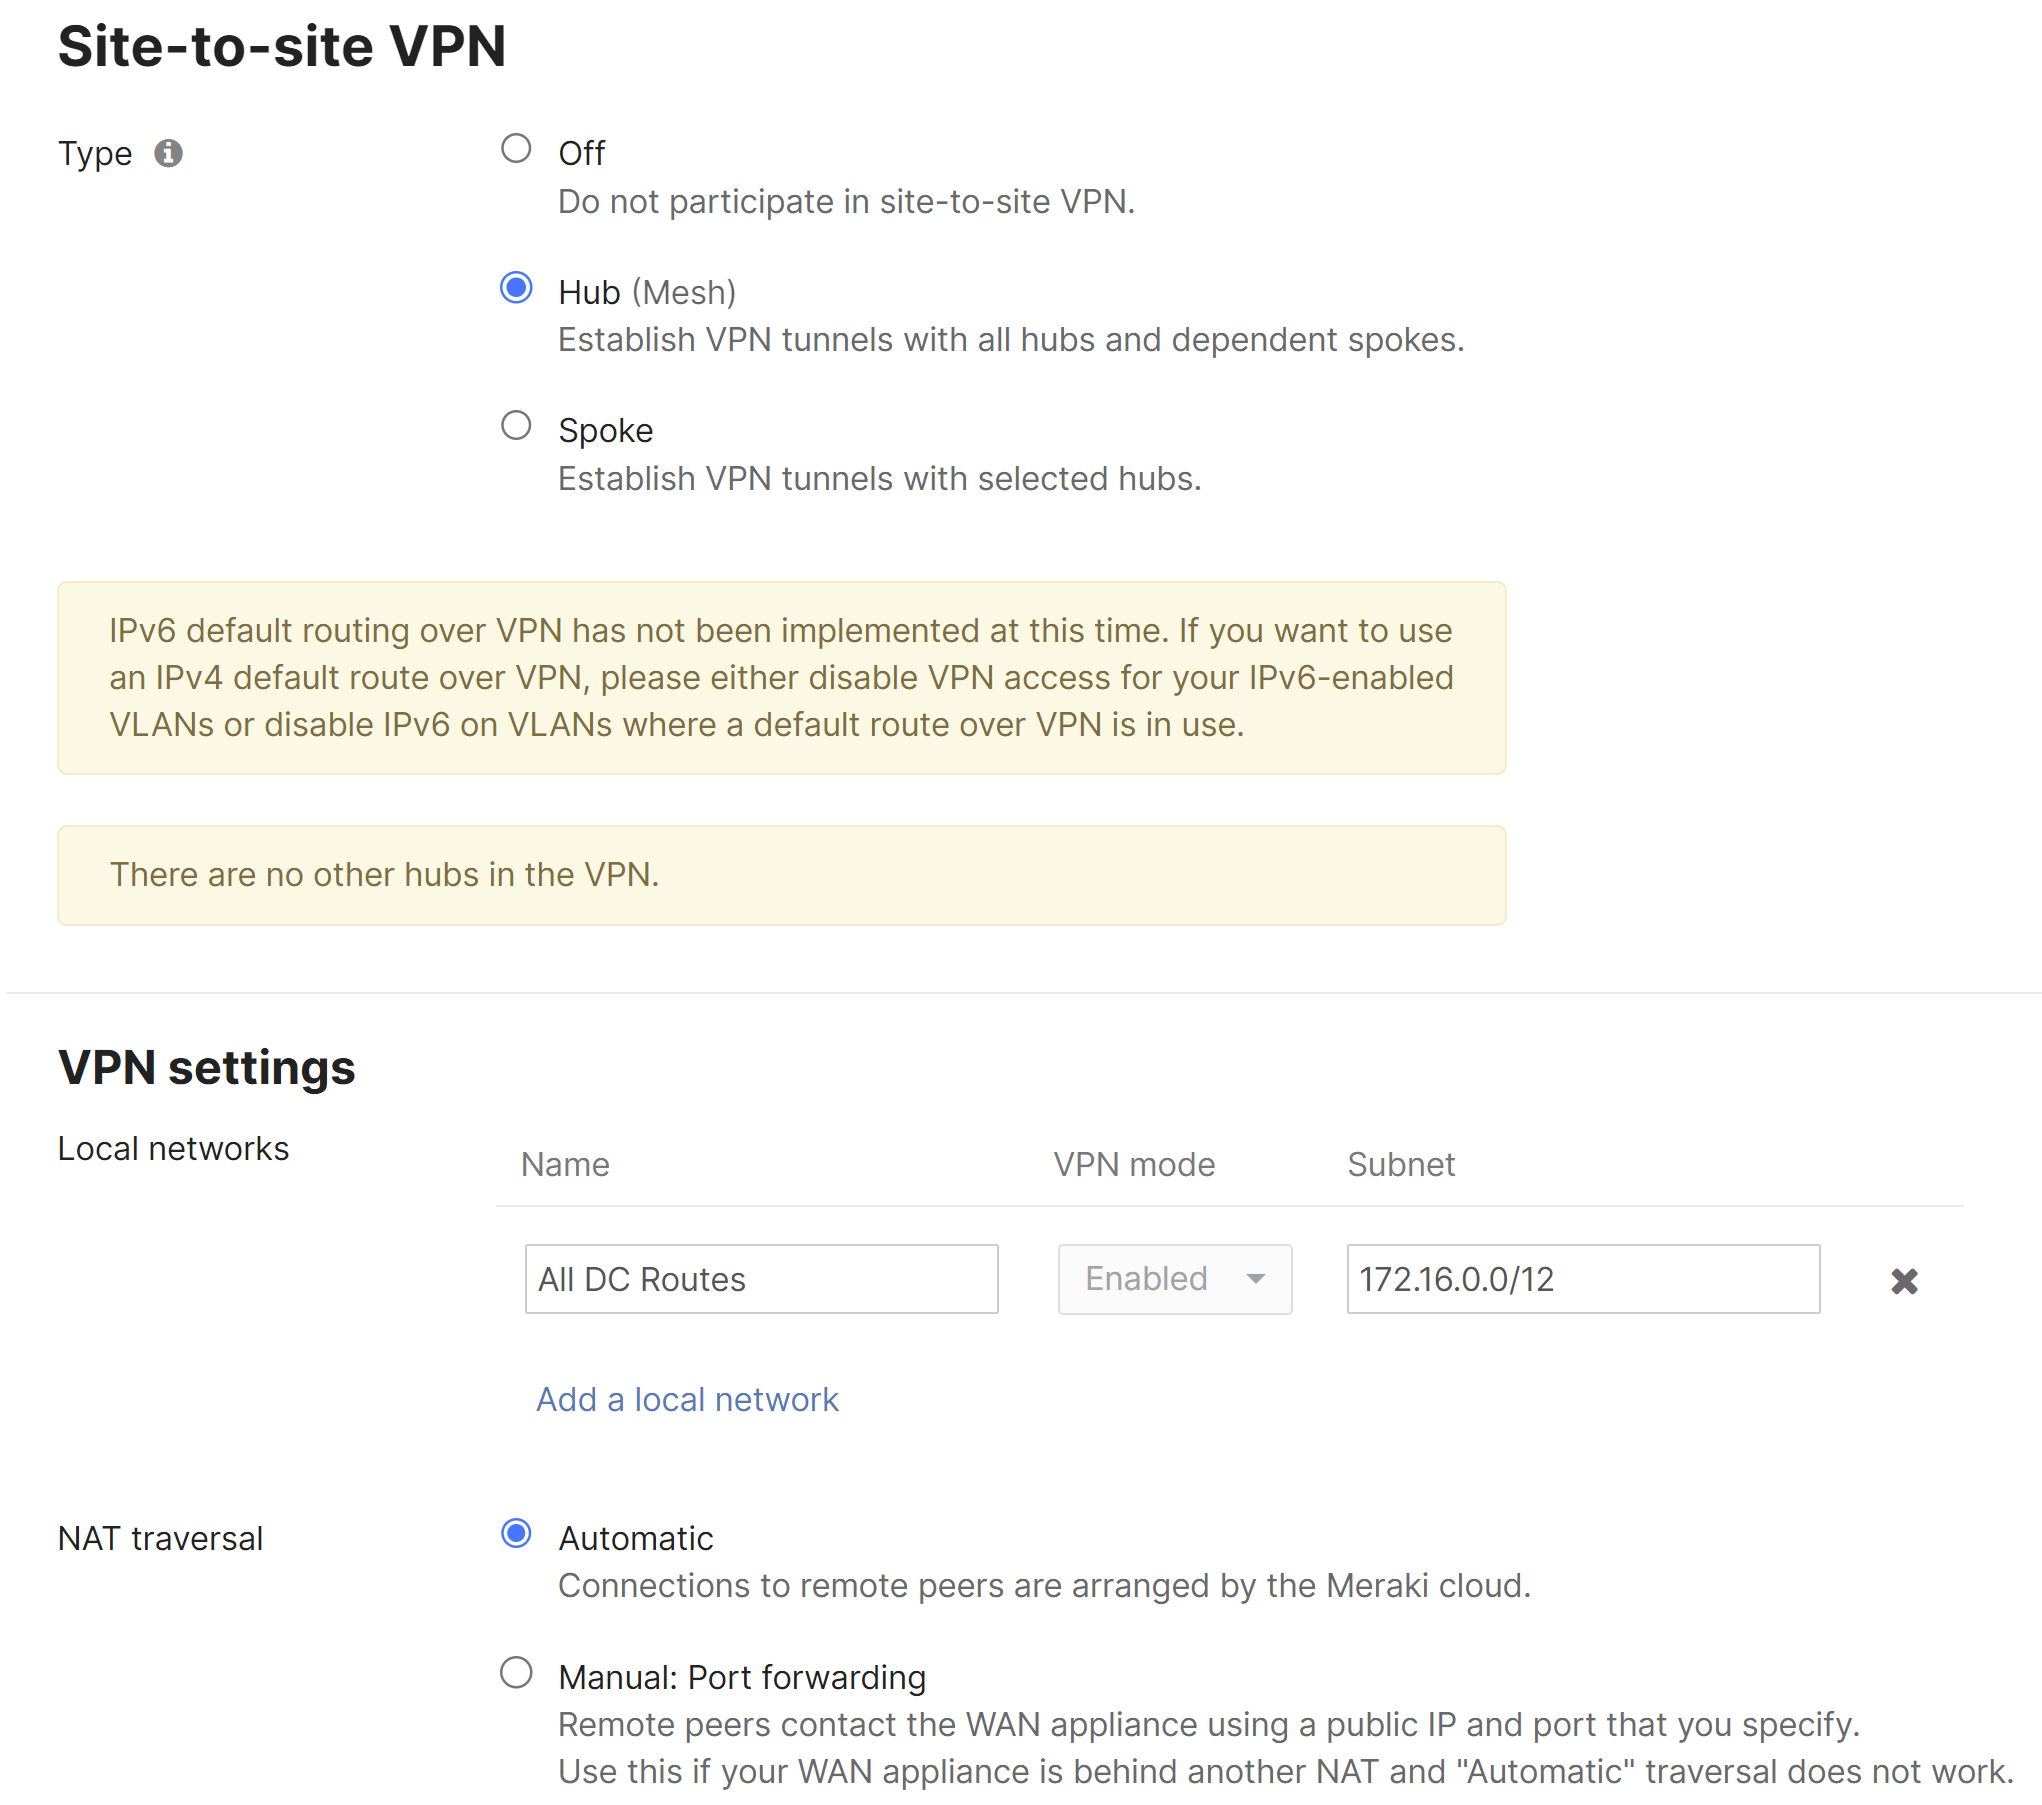 Site-to-site VPN enabled configuration